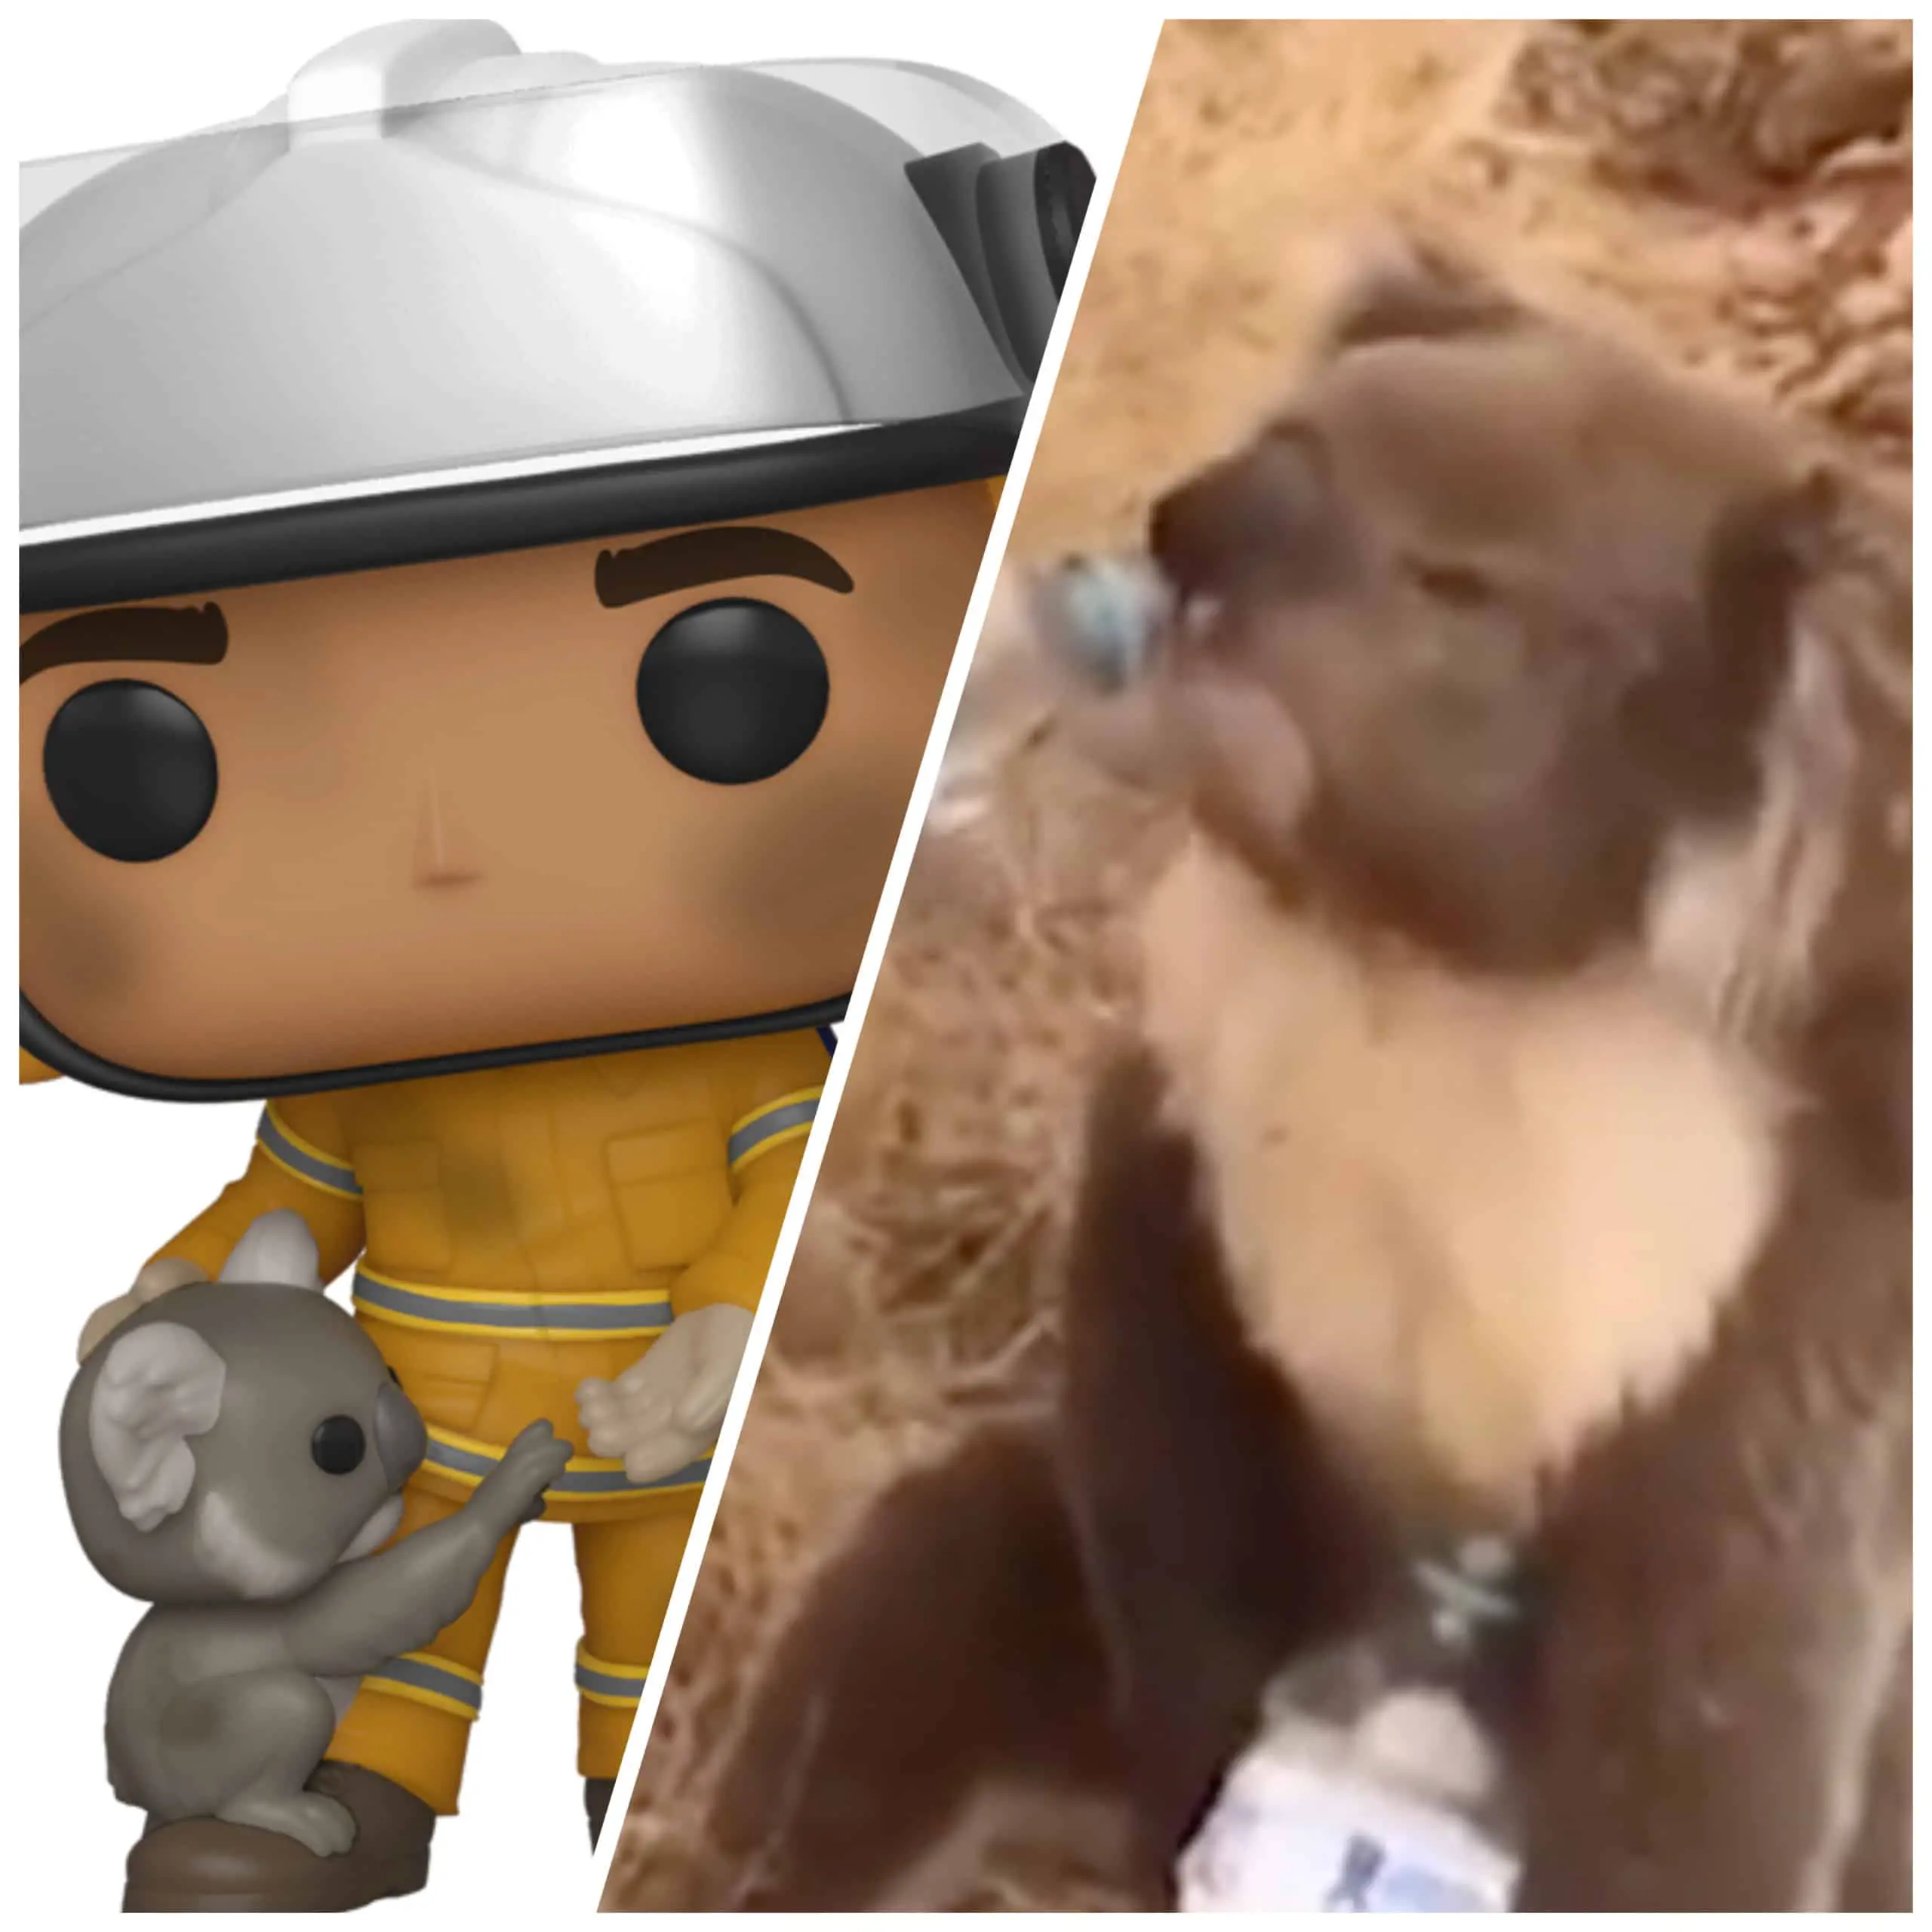 Funko Released​ Australian Firefighters Pop to Raise Funds For Supporting Animals. |